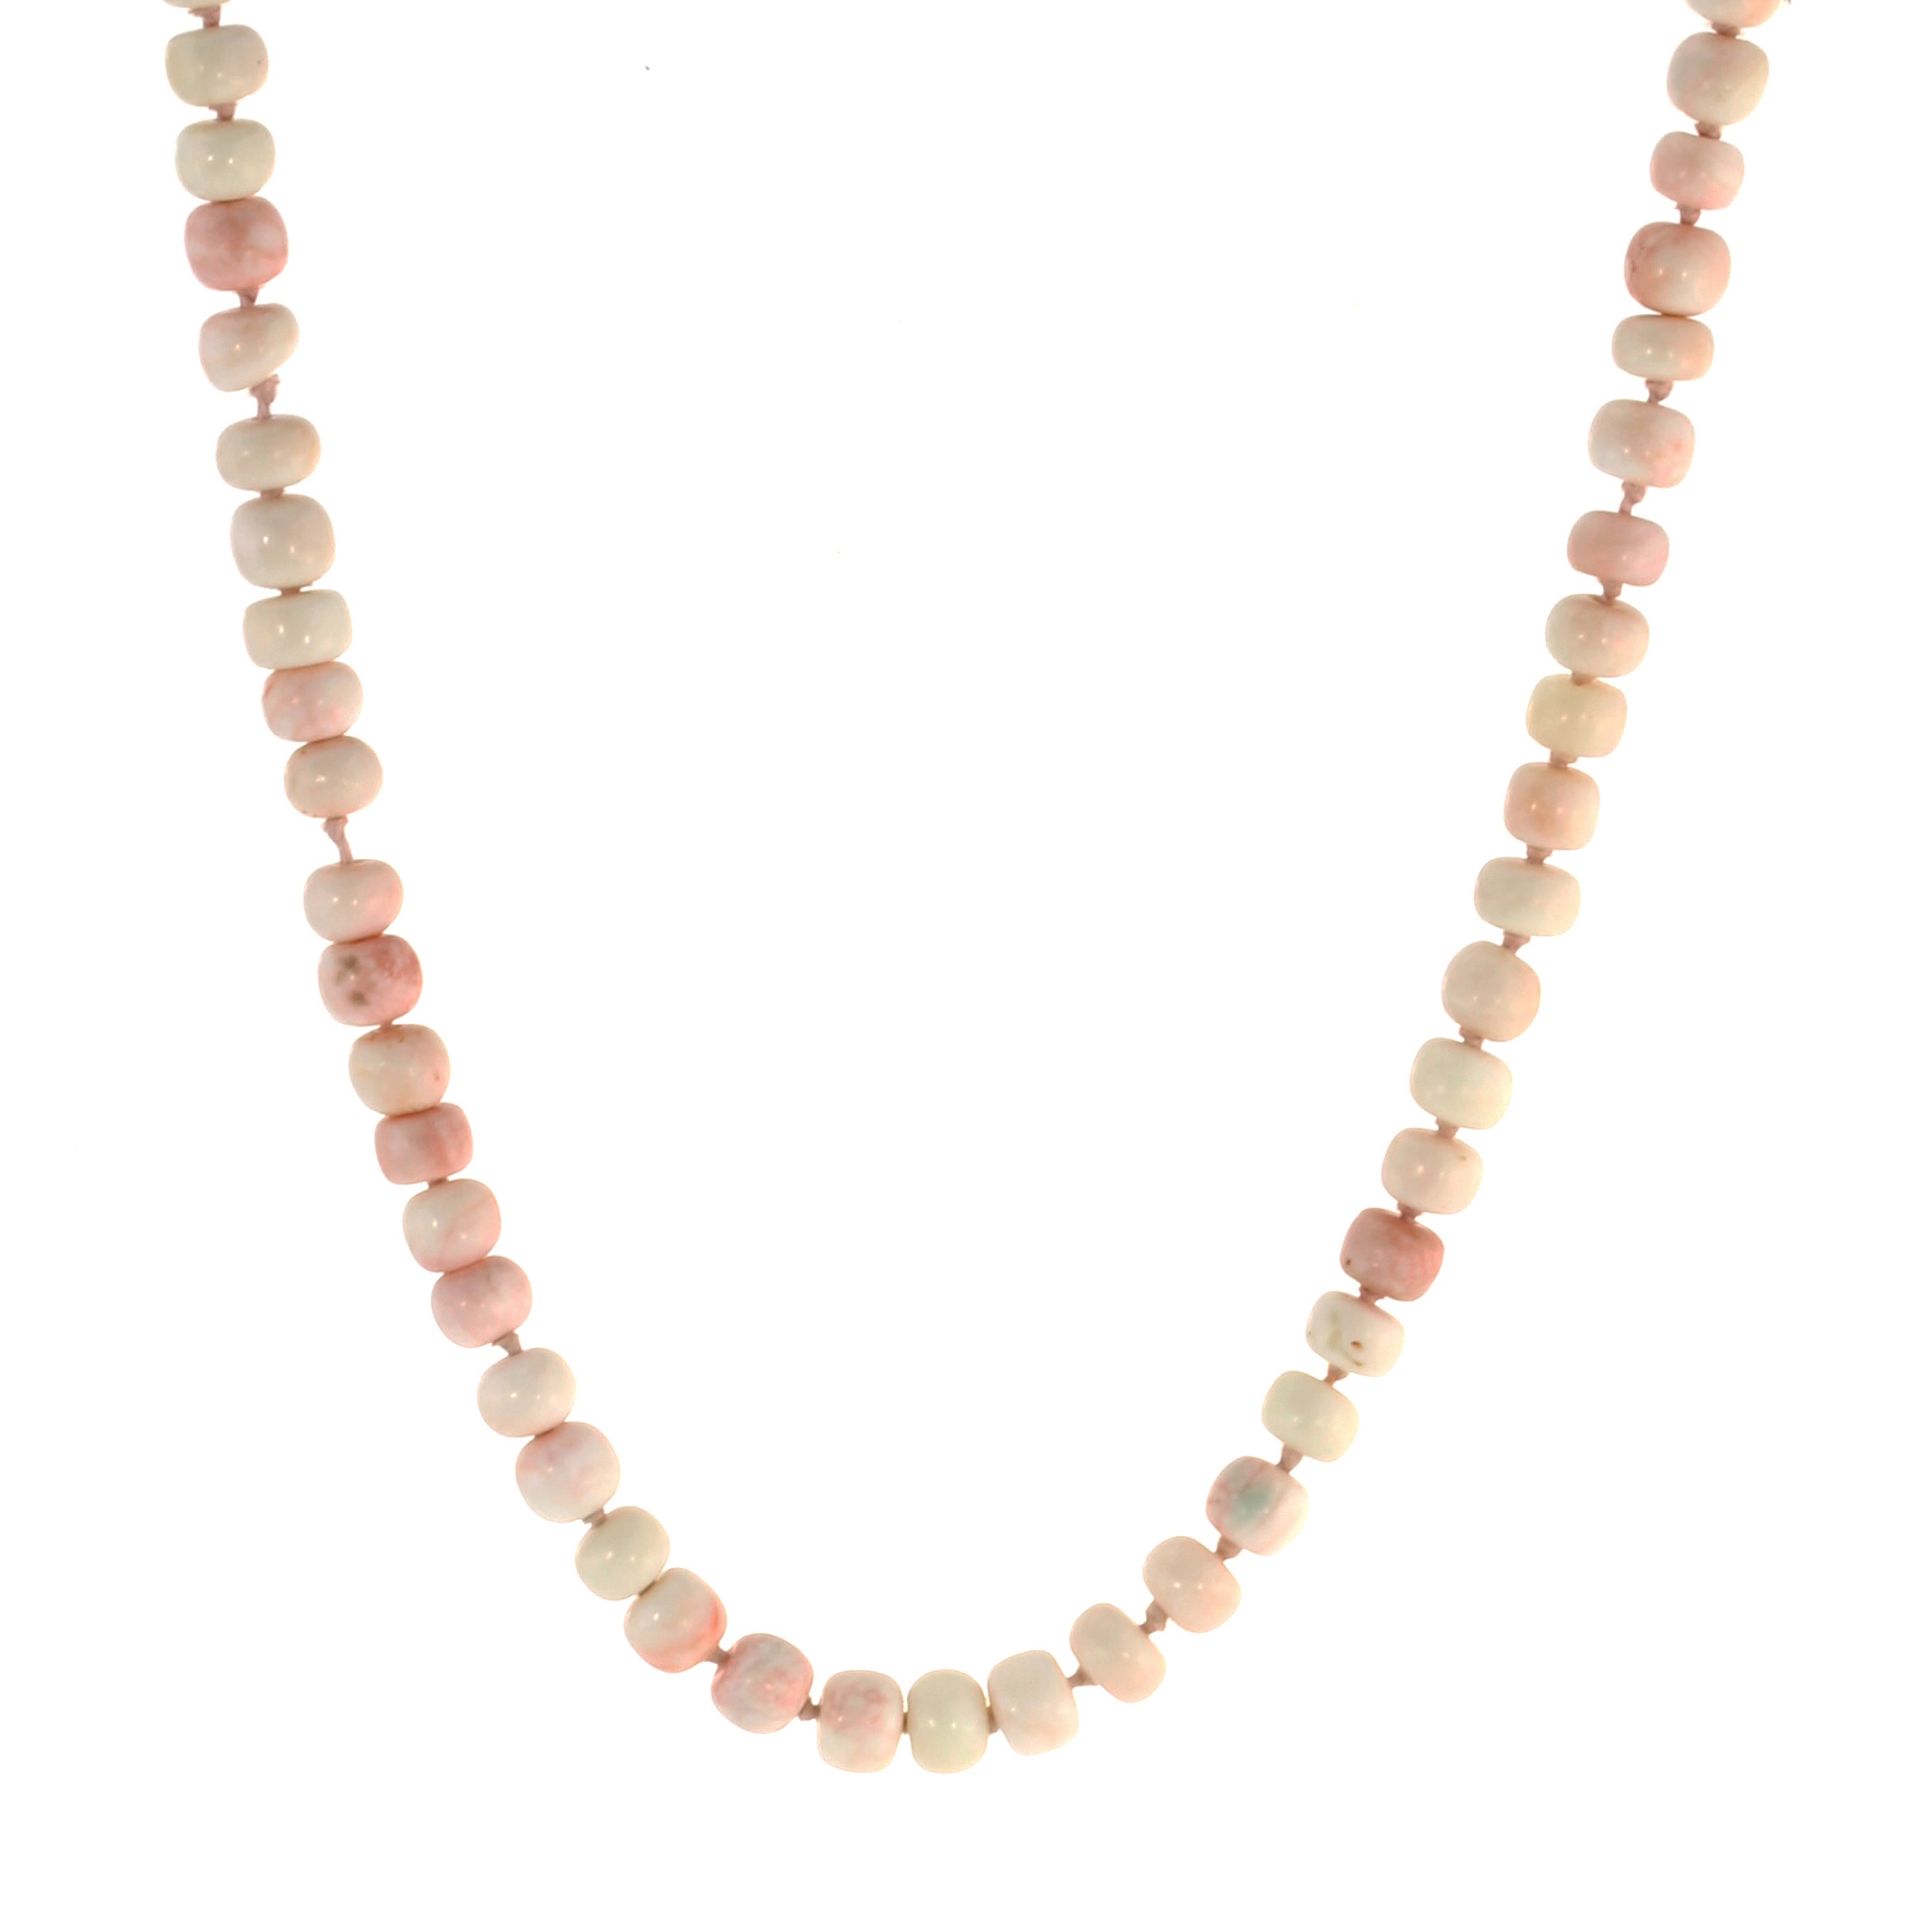 A CORAL BEAD NECKLACE comprising a single strand of eighty four polished coral beads, length